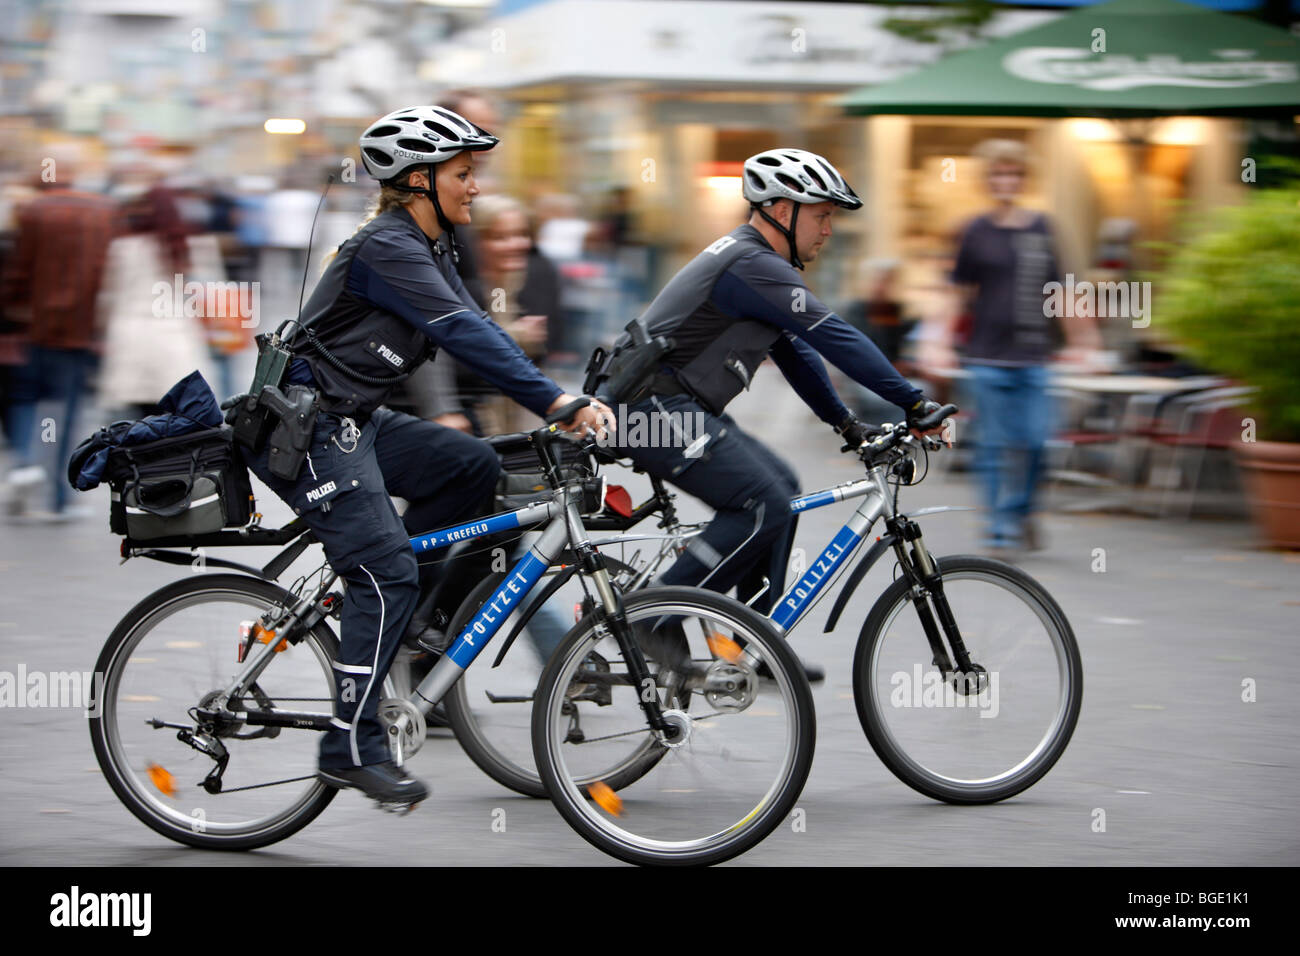 Bicycle patrols in a pedestrian area, Germany, Europe. Stock Photo